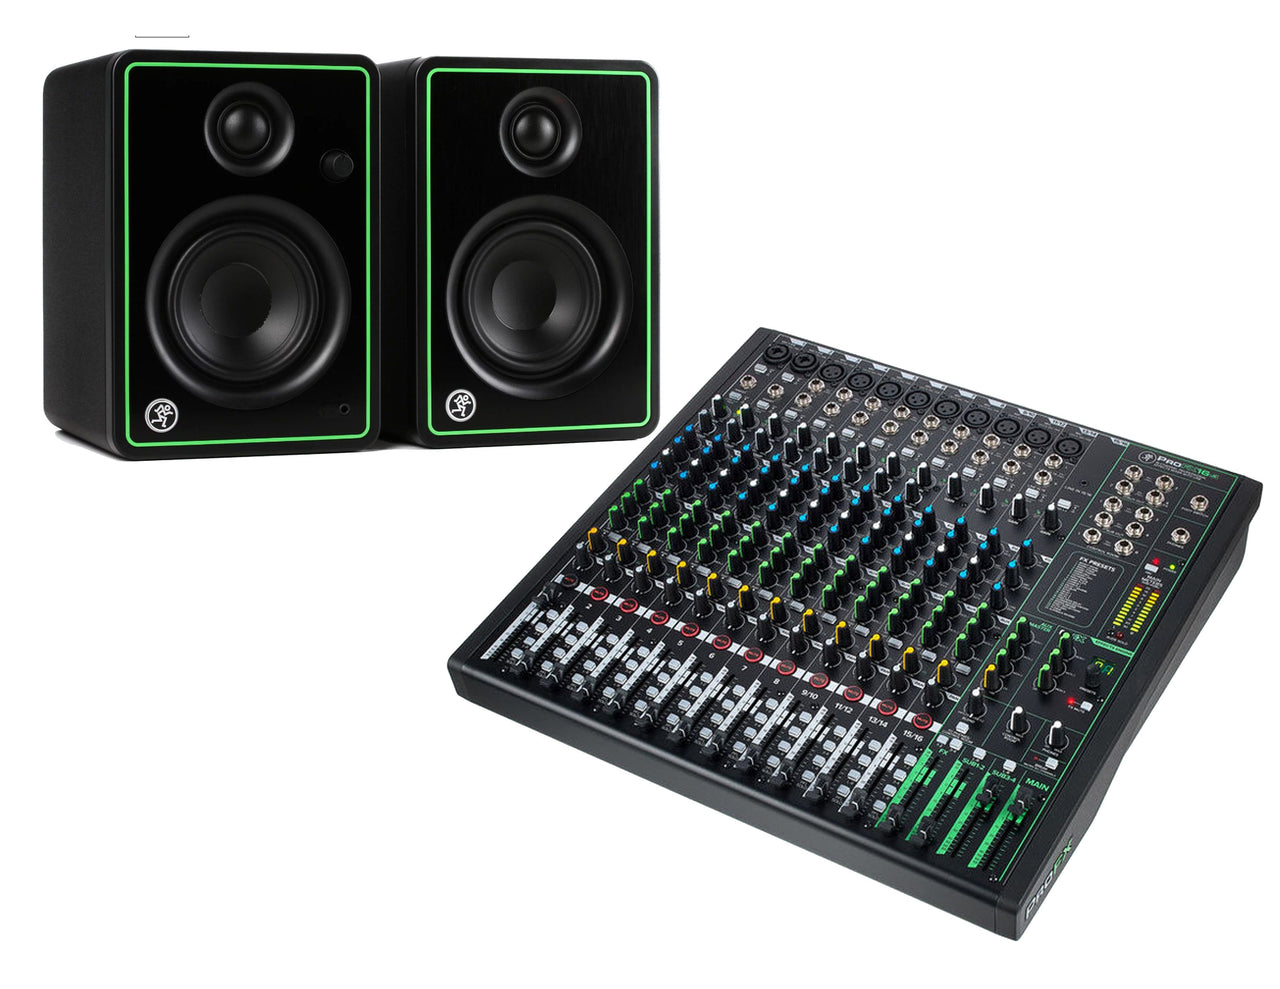 Mackie Bundle with CR4-X - Studio Monitor - Pair + ProFX16v3 16-channel Mixer with USB and Effects